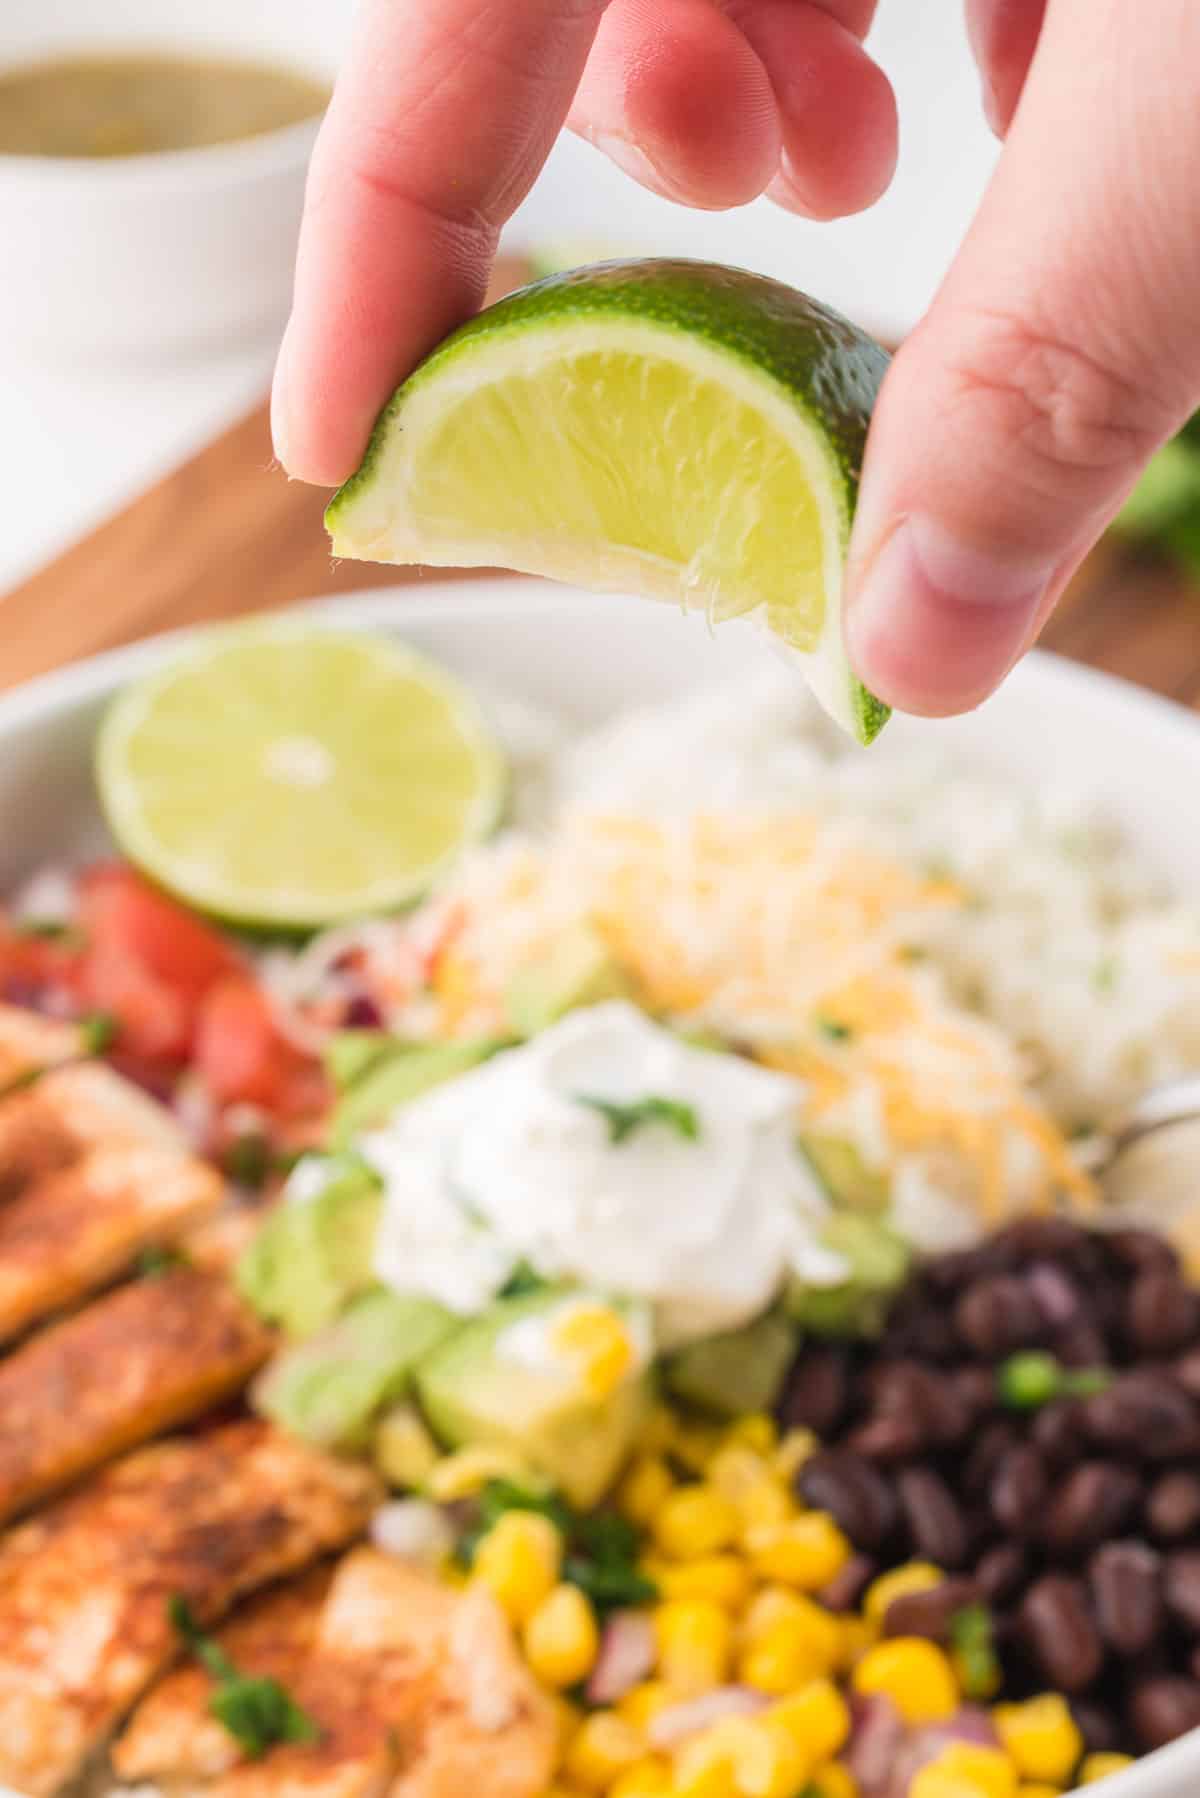 Squeezing a lime wedge over a Mexican chicken burrito bowl.